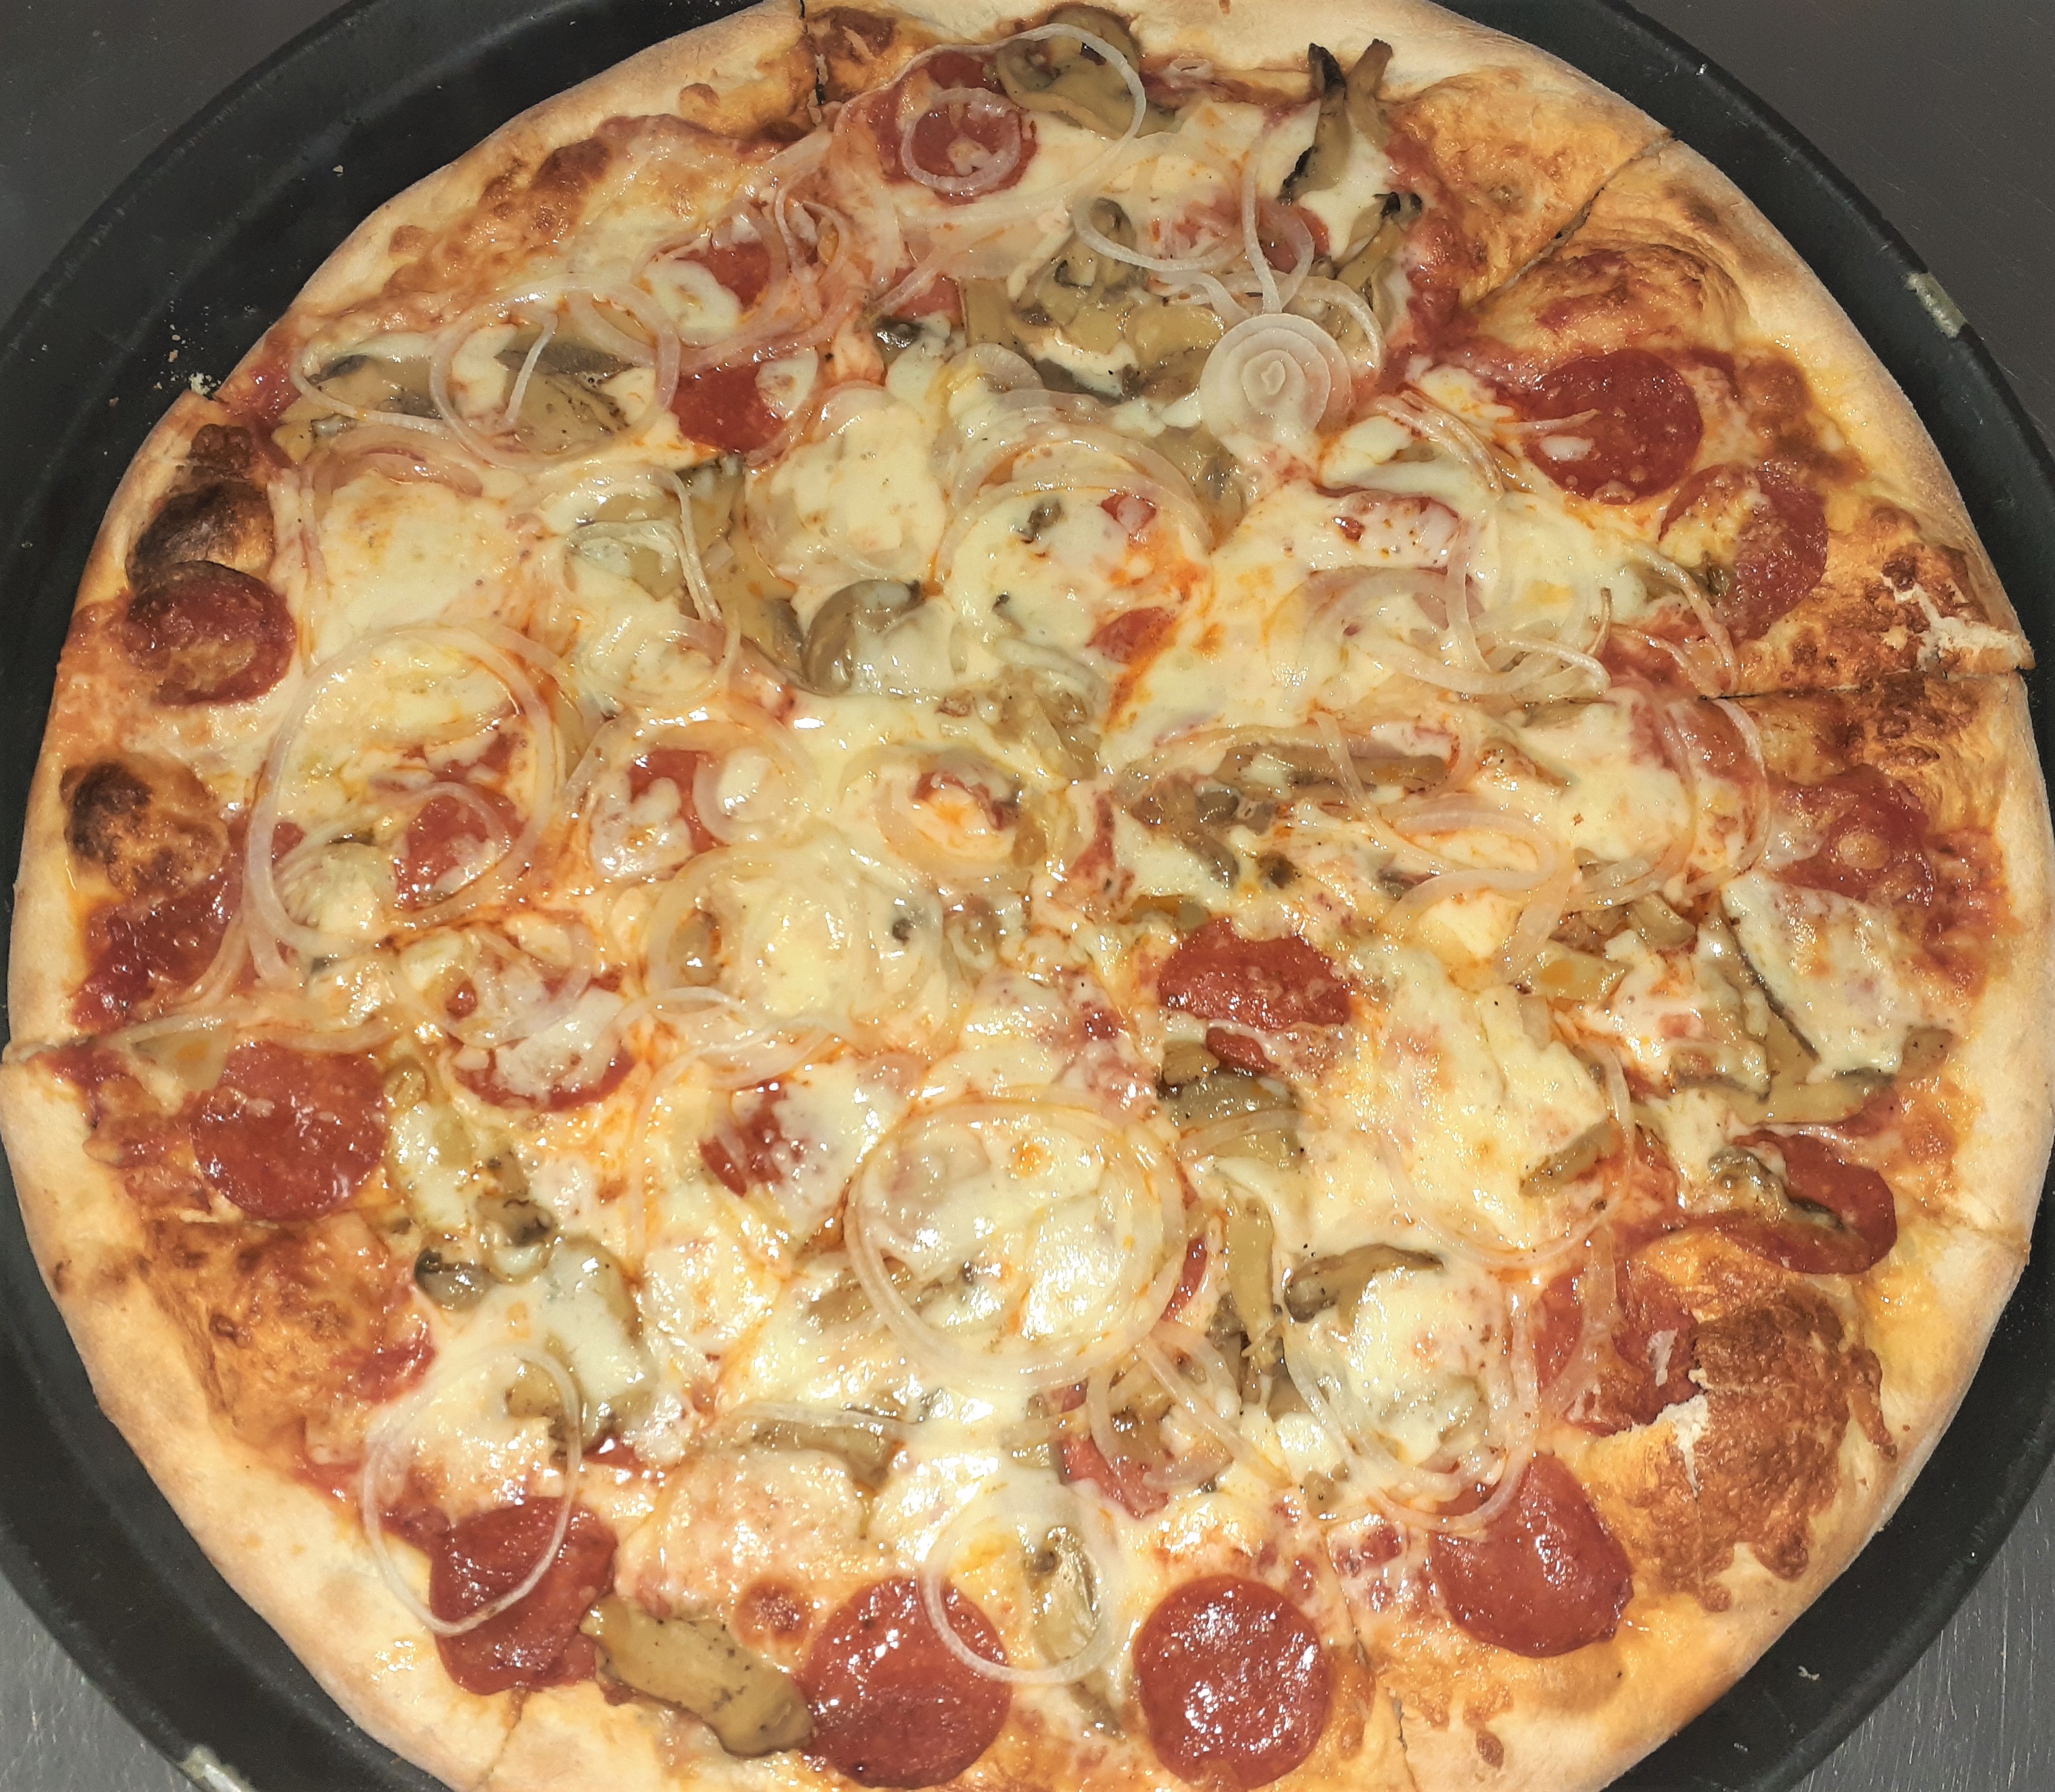 HANDTOSSED PIZZA WITH GREEN PEPPERS, PEPPERONI AND MUSHROOMS